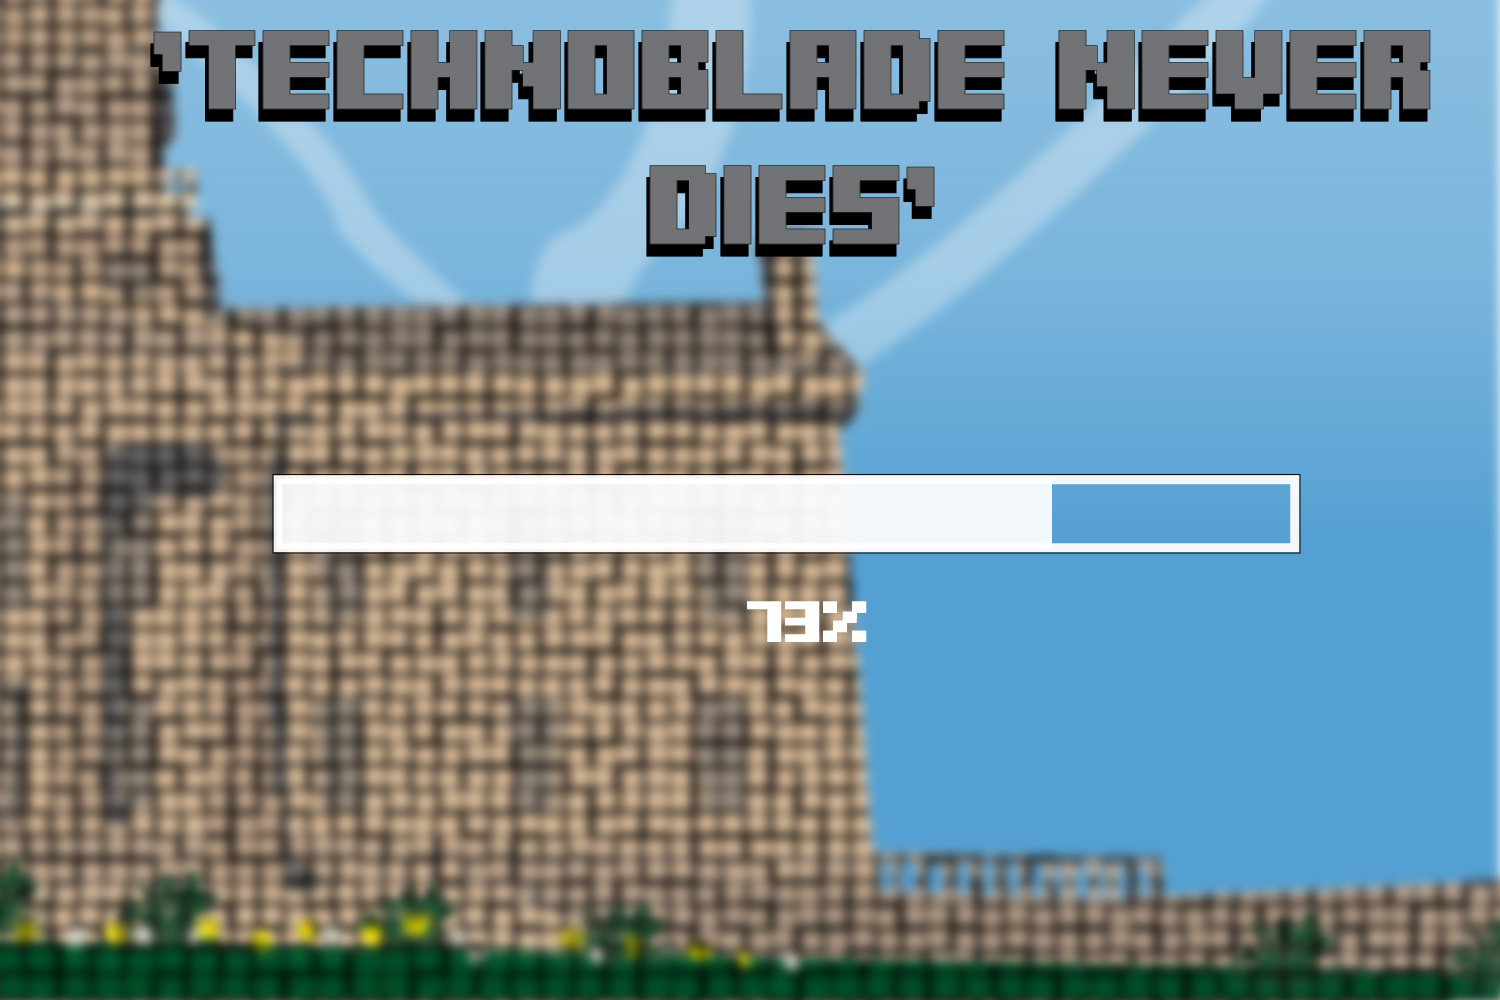 Fans remember Technoblade, a Minecraft r who died of cancer﻿﻿, Article